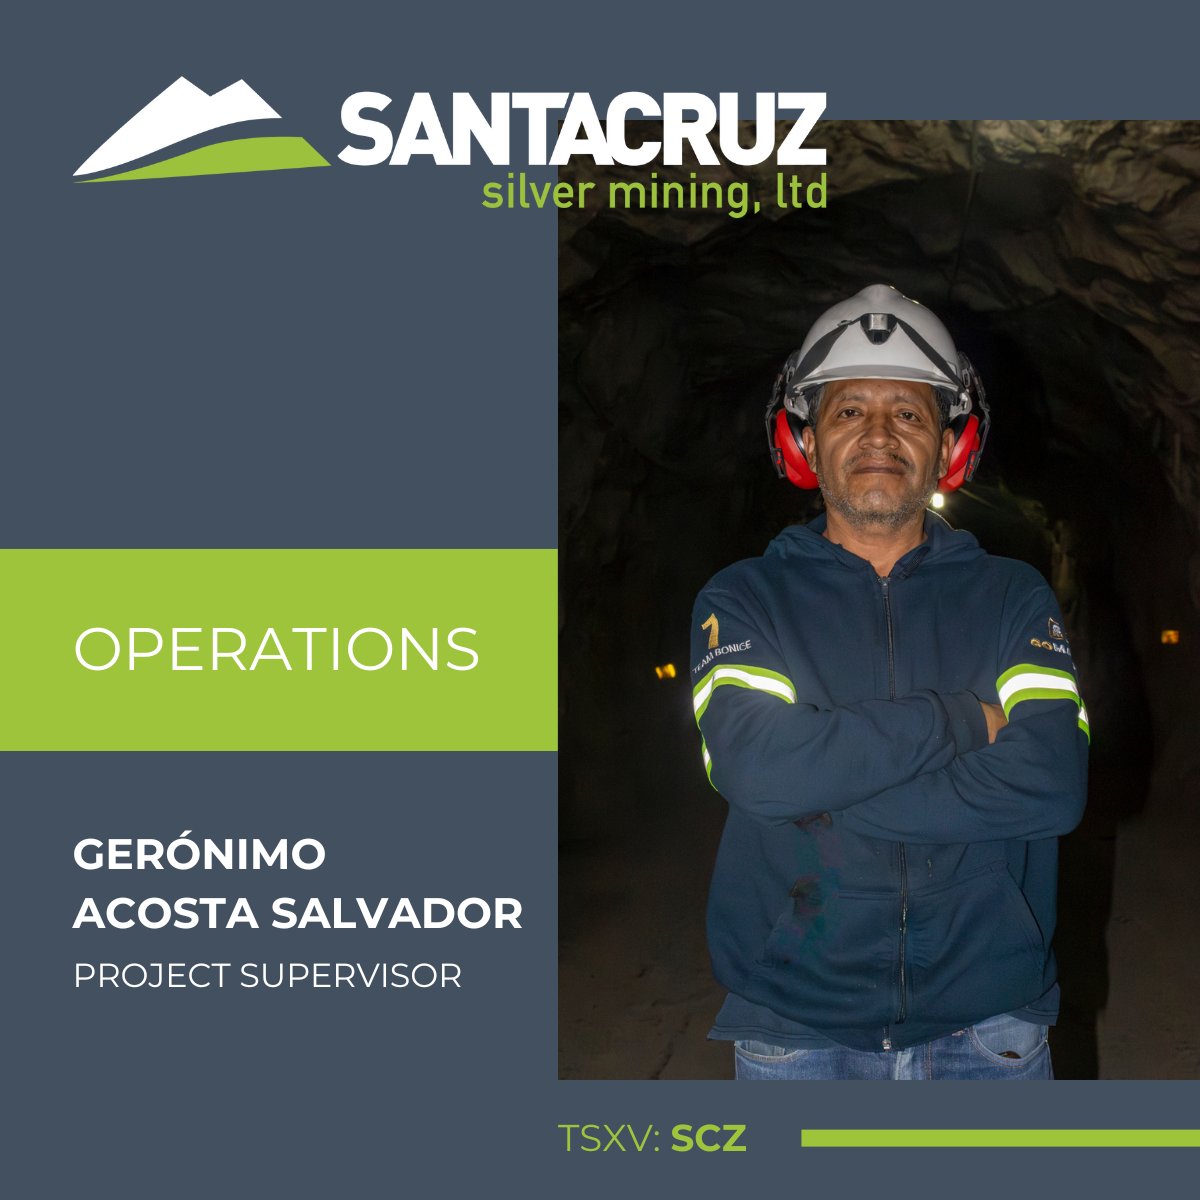 Bringing you closer to the people behind Santacruz, we are thrilled to share an interview with Gerónimo Acosta Salvador, a Project Supervisor at our Zimapán mine: How many years have you been in the mining industry? I have been working in mining for approximately 20 years, in…